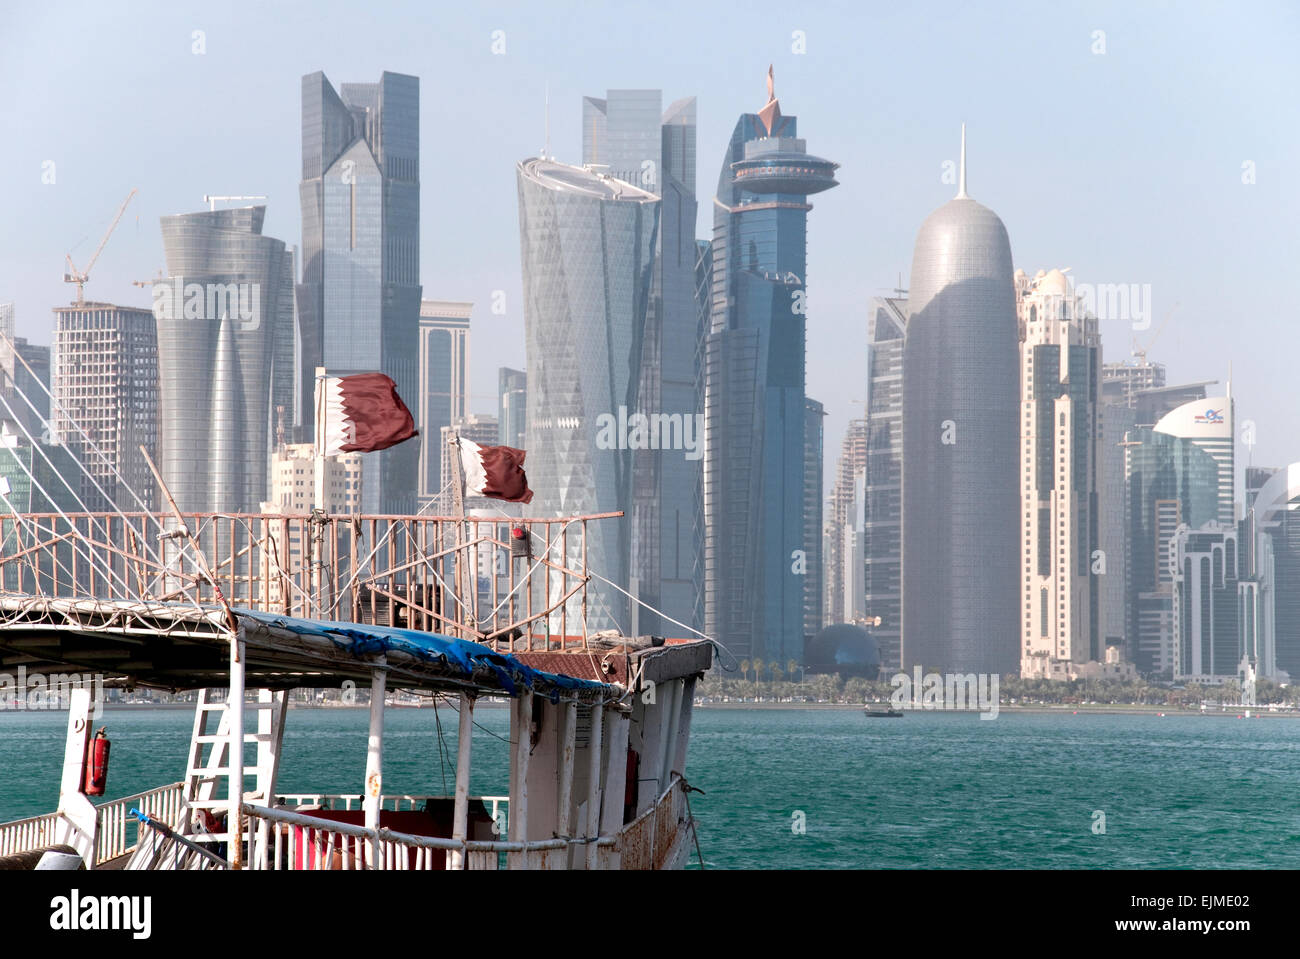 Qatari flags flap on a dhow boat in the Arabian Gulf with the skyline of Doha in the background. Stock Photo